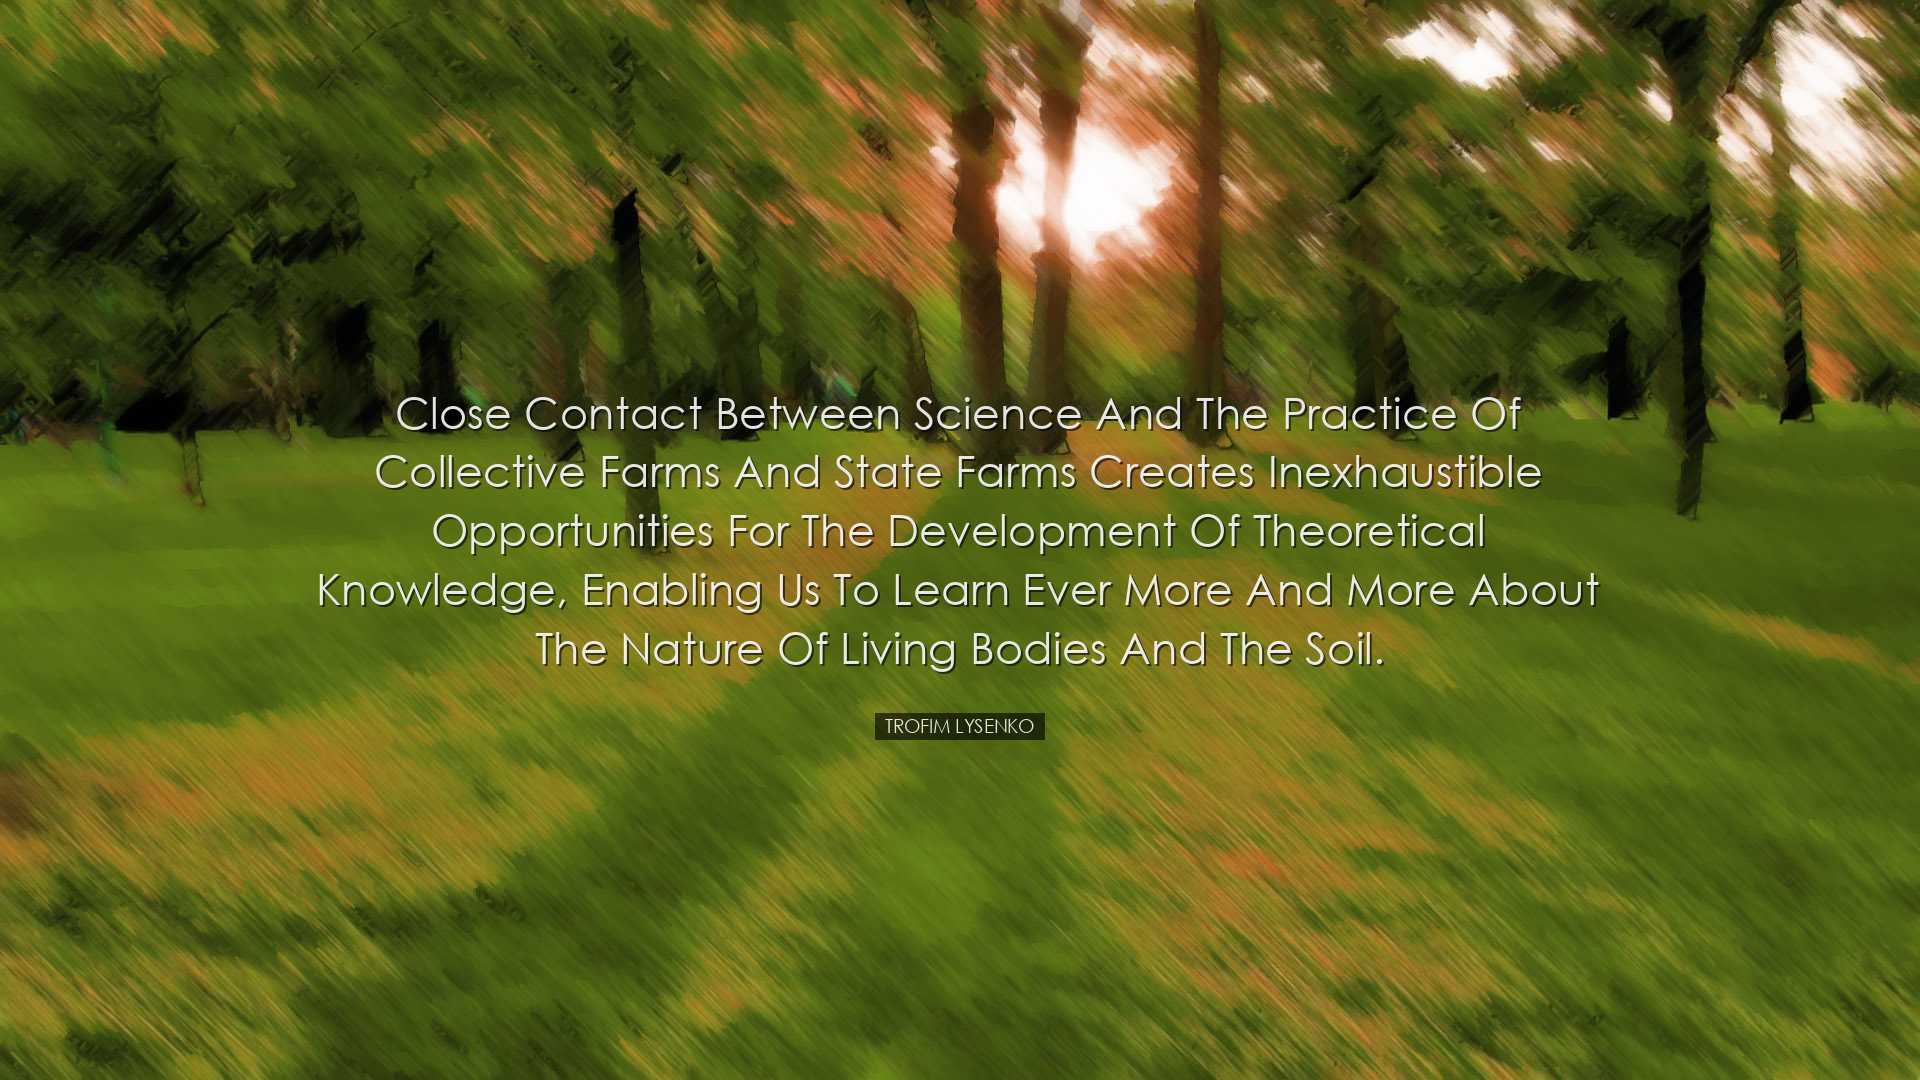 Close contact between science and the practice of collective farms